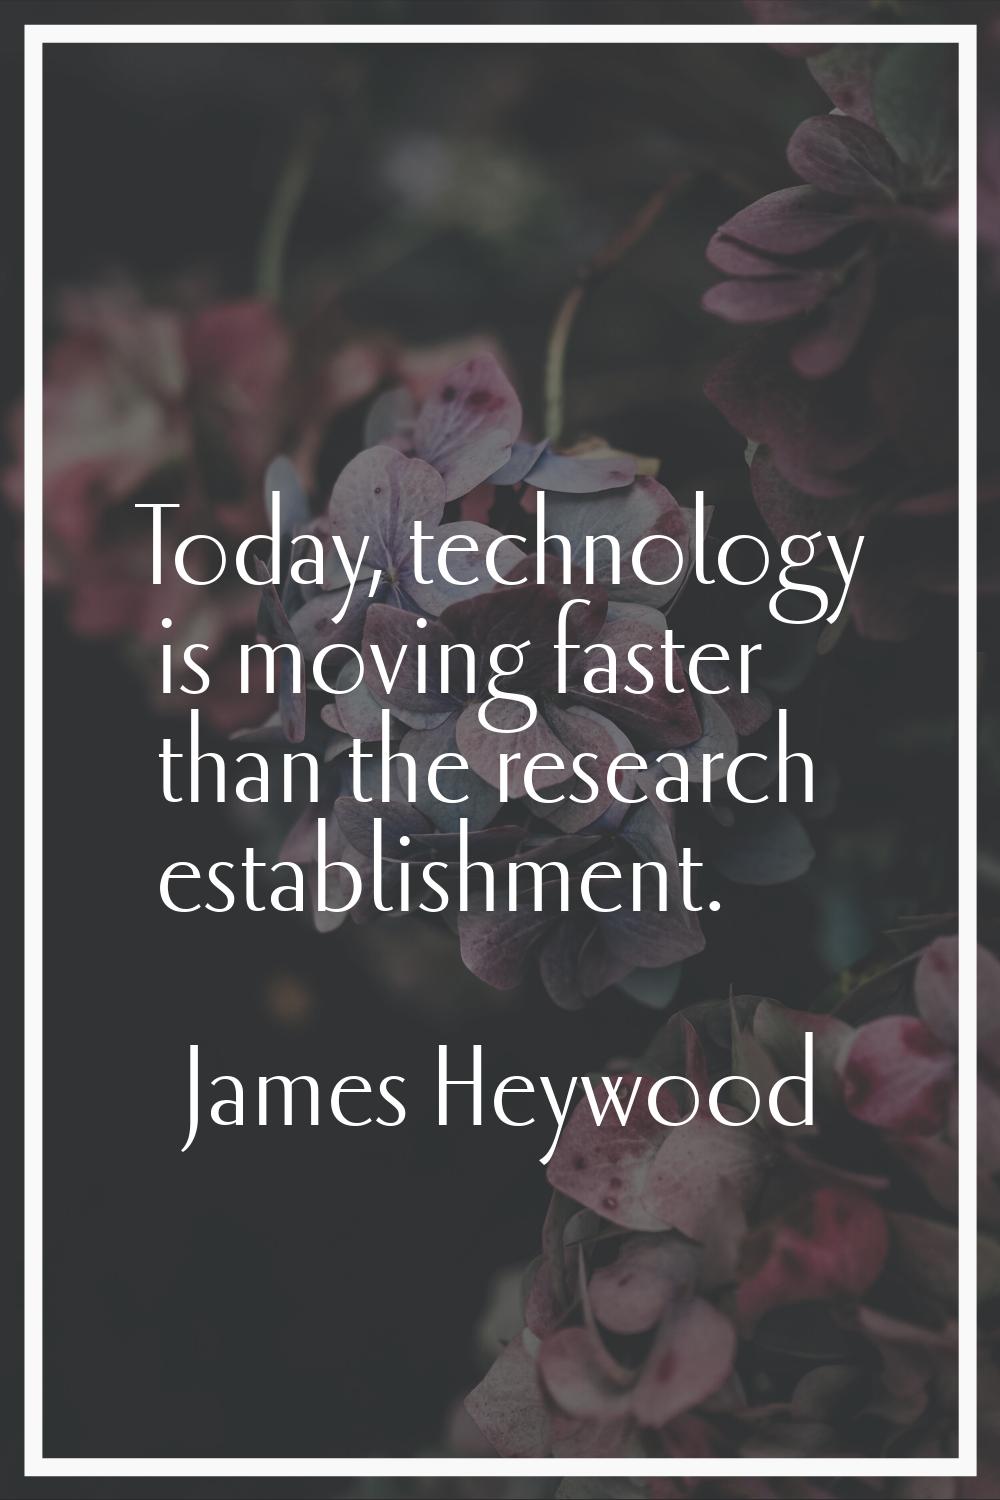 Today, technology is moving faster than the research establishment.